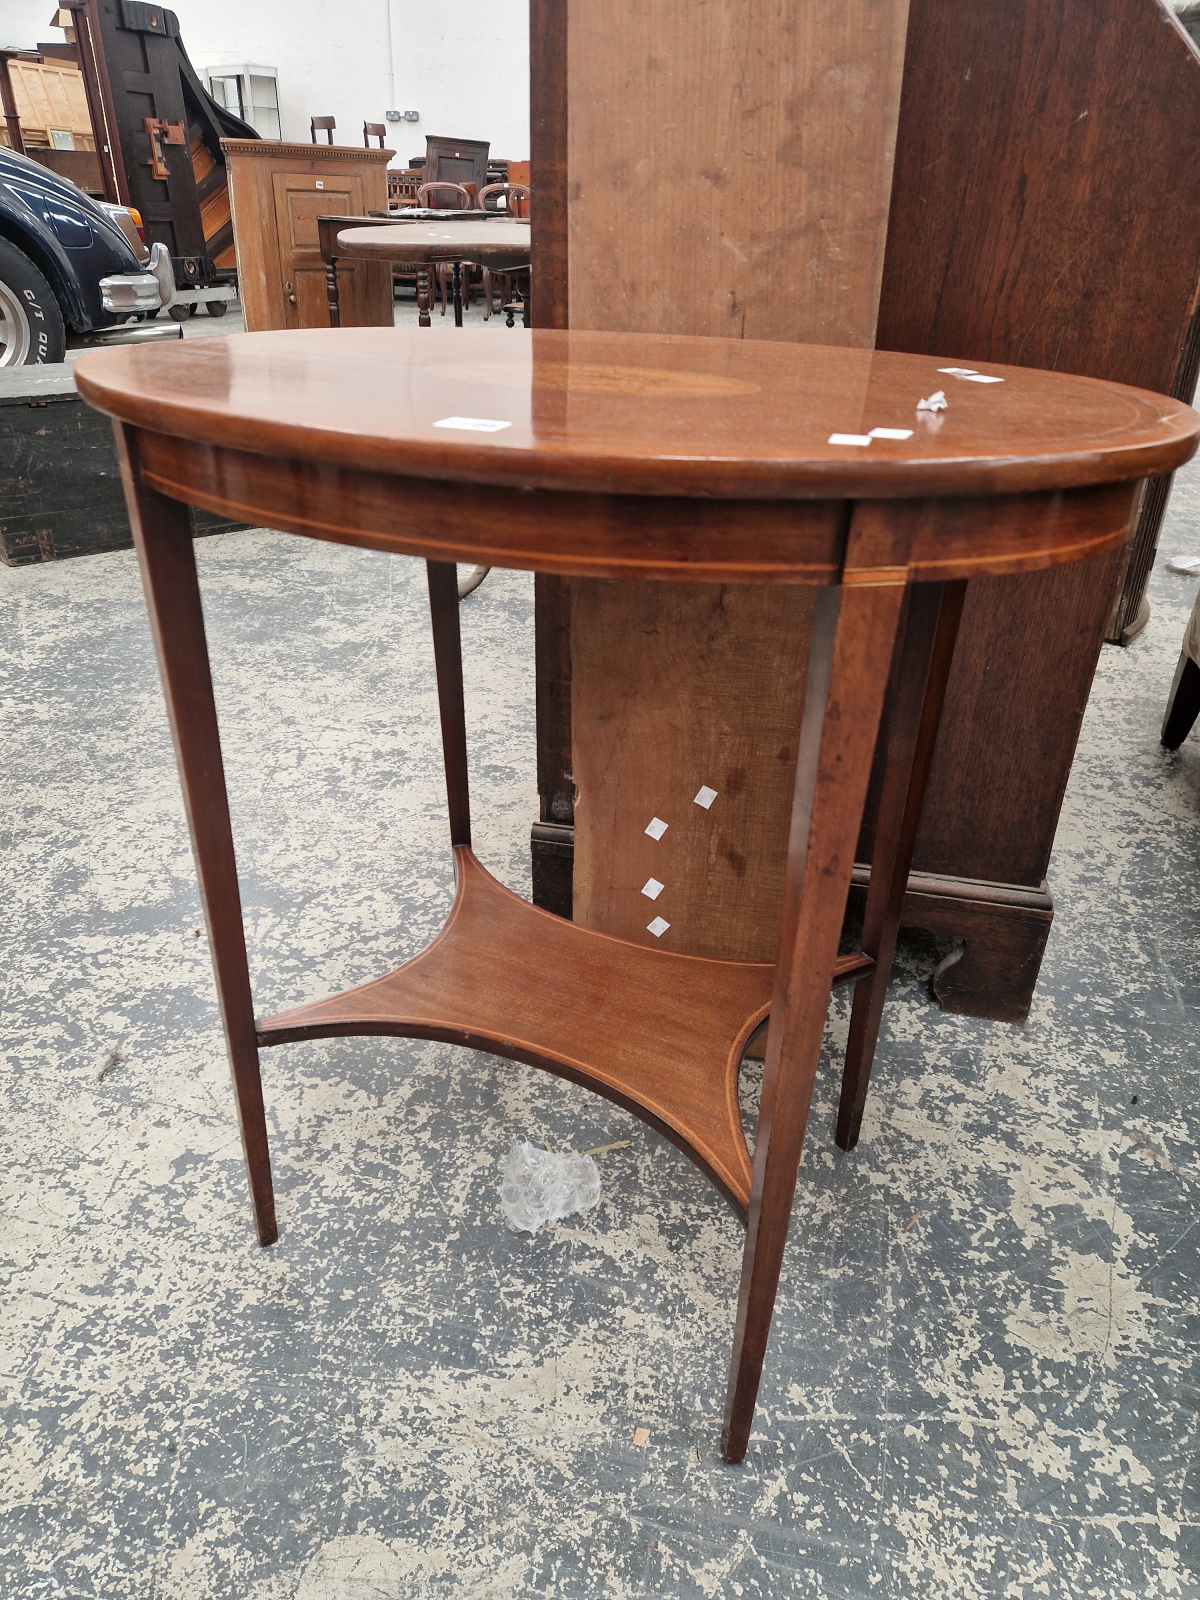 AN EDWARDIAN INLAID AND CROSS BANDED OAVAL OCCASIONAL TABLE WITH LOWER TIER. - Image 2 of 3